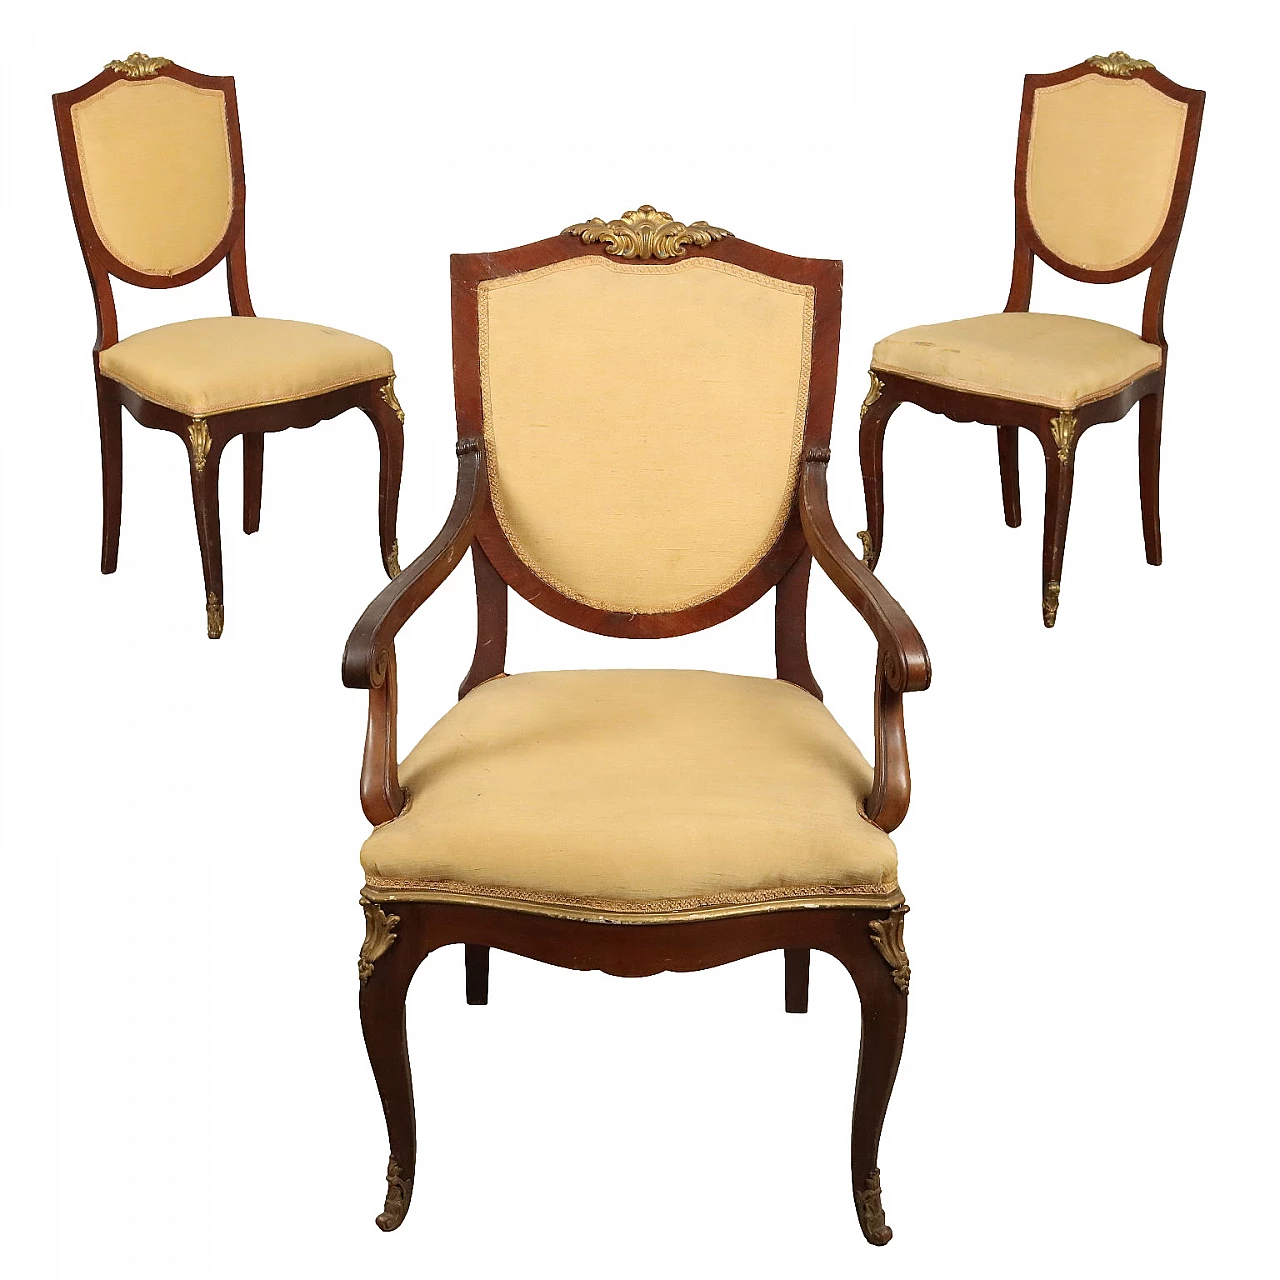 Pair of chairs and an armchair in mahogany with bronze details 1